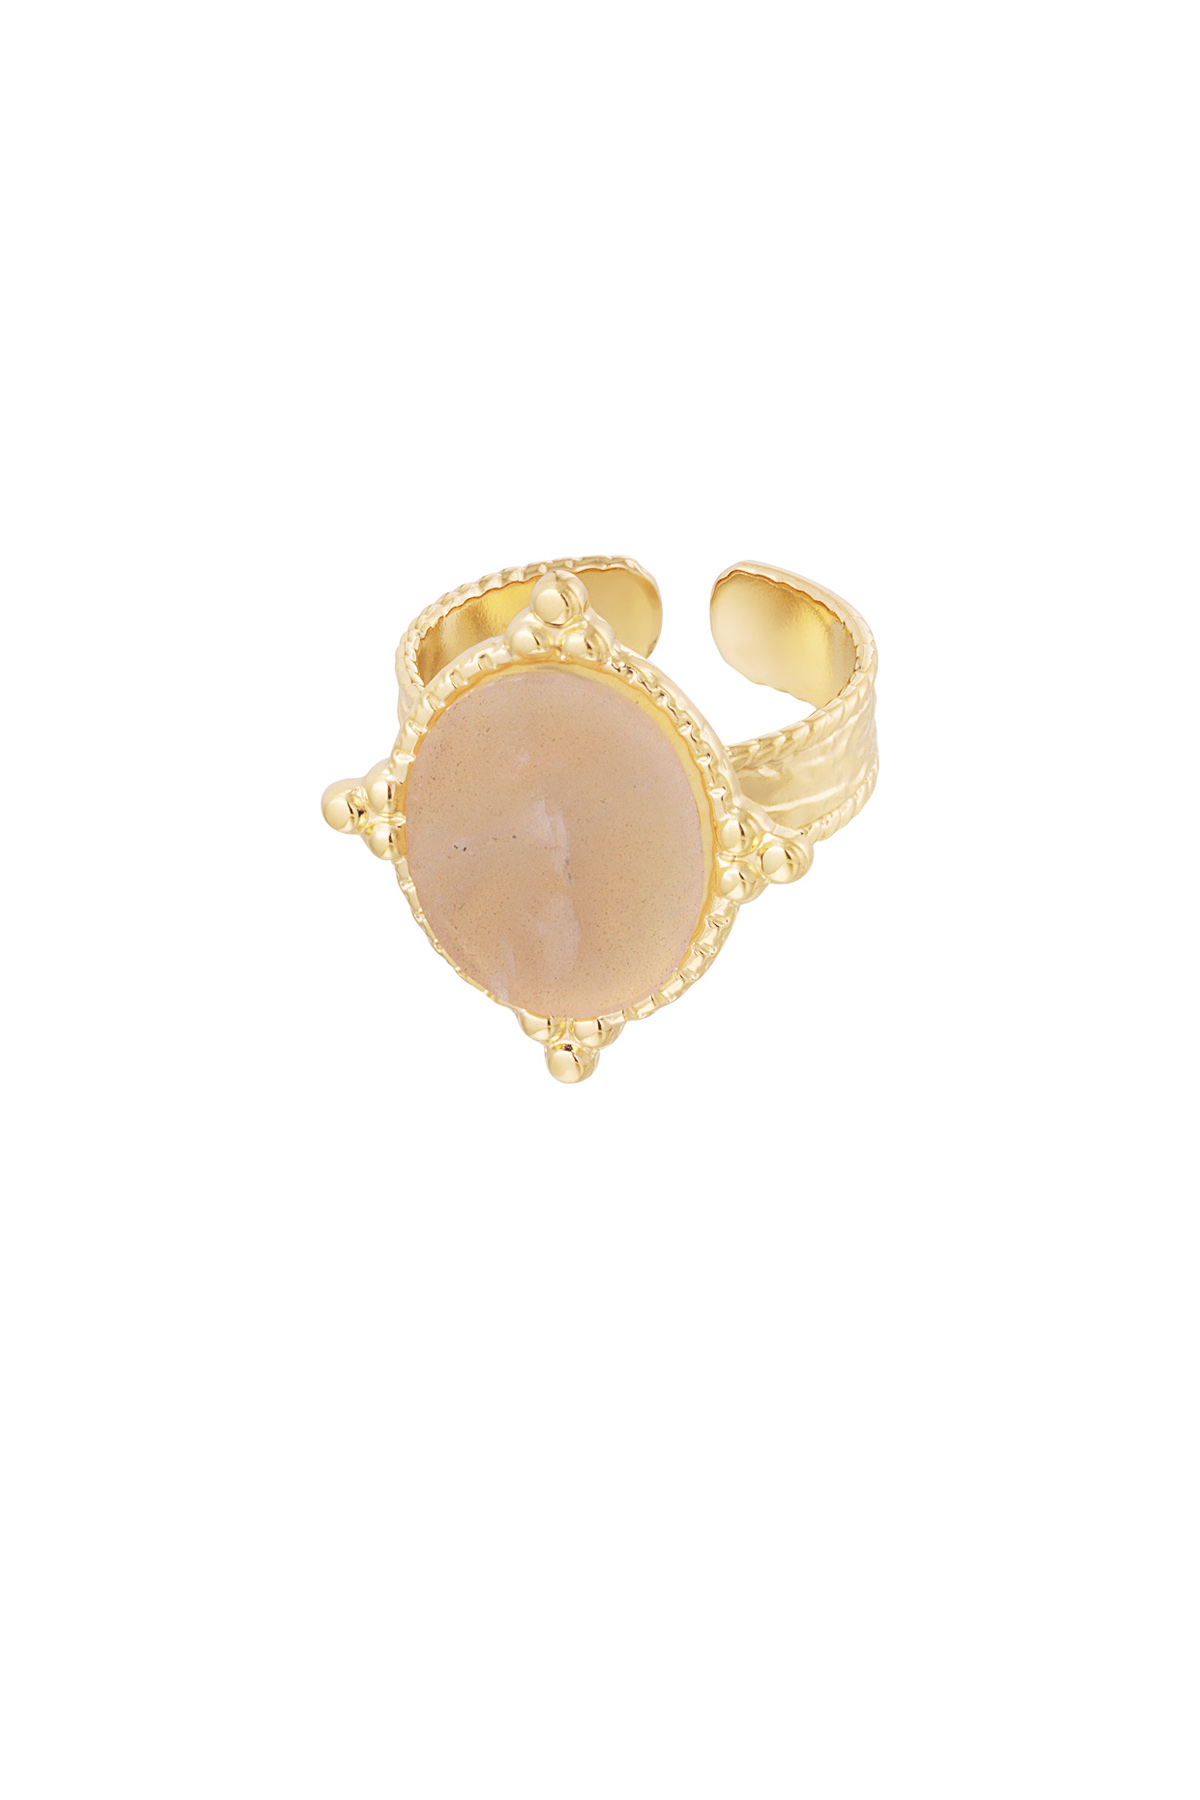 Ring stone with decoration - gold/beige